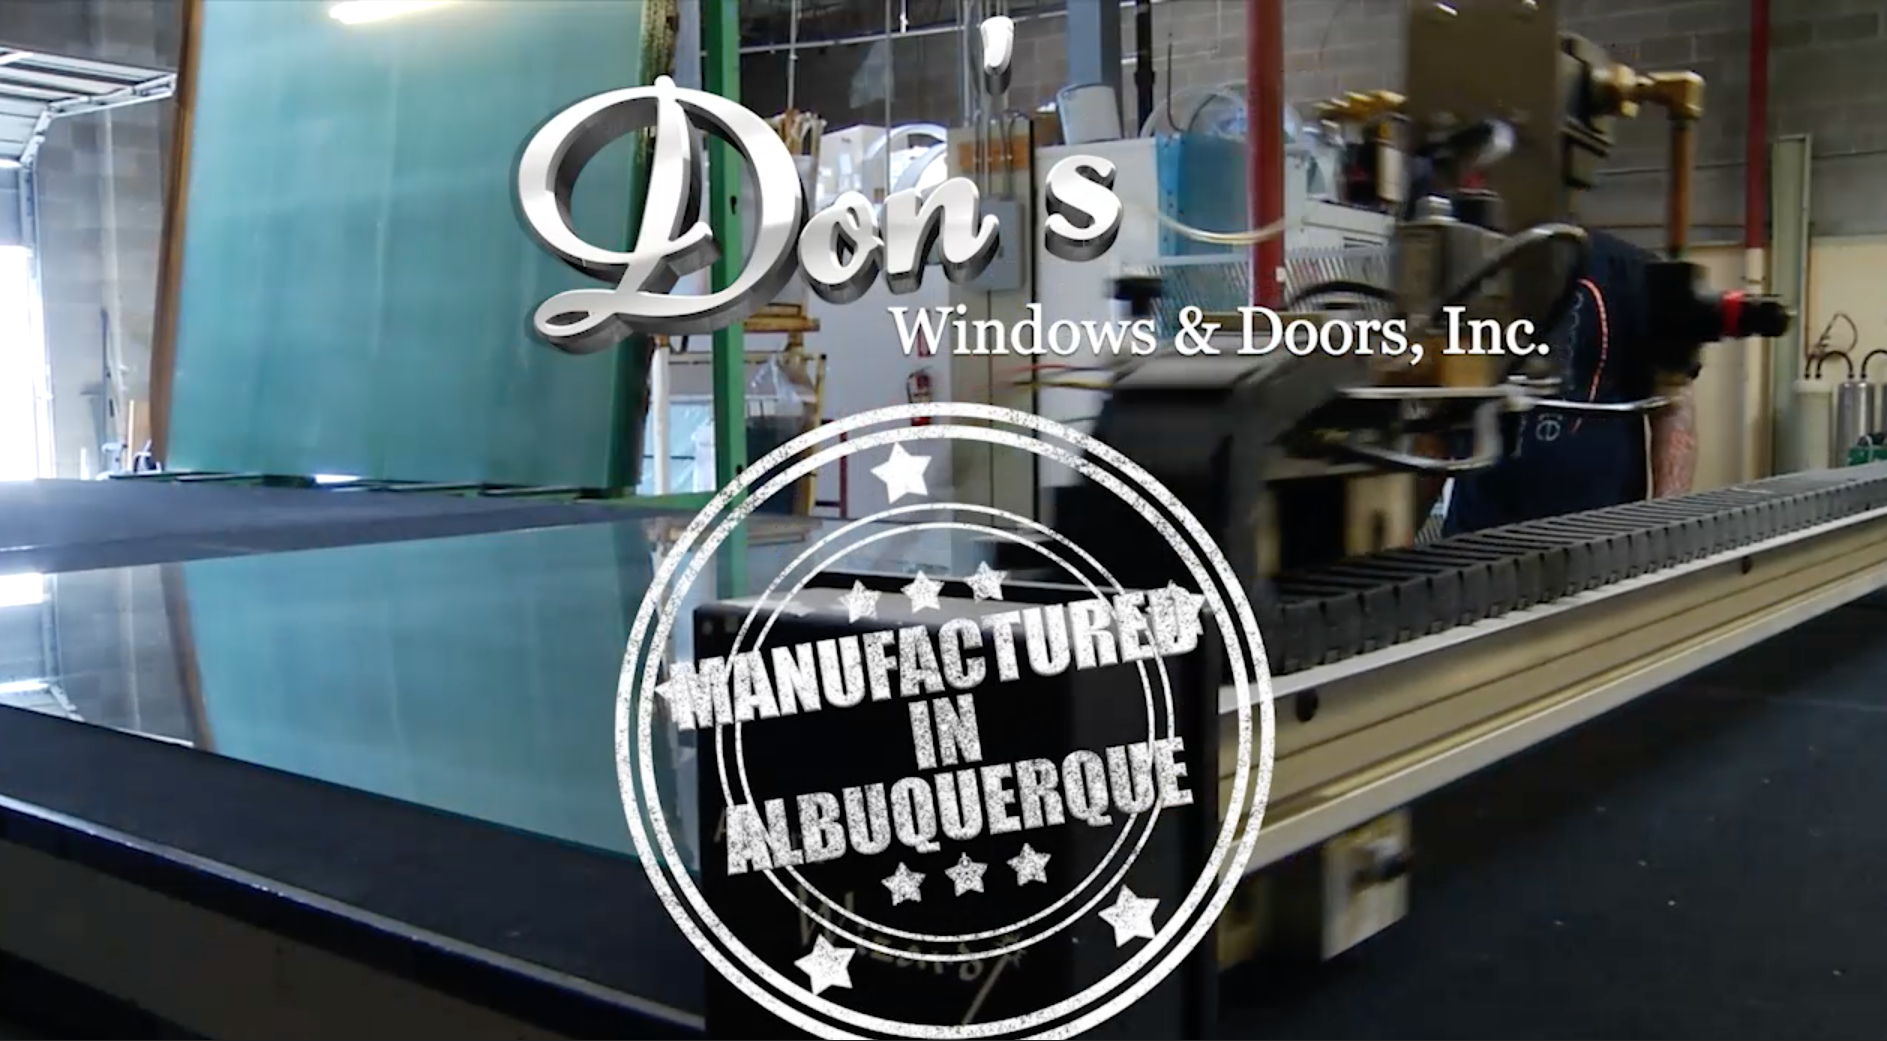 Image of Dons Windows and Doors